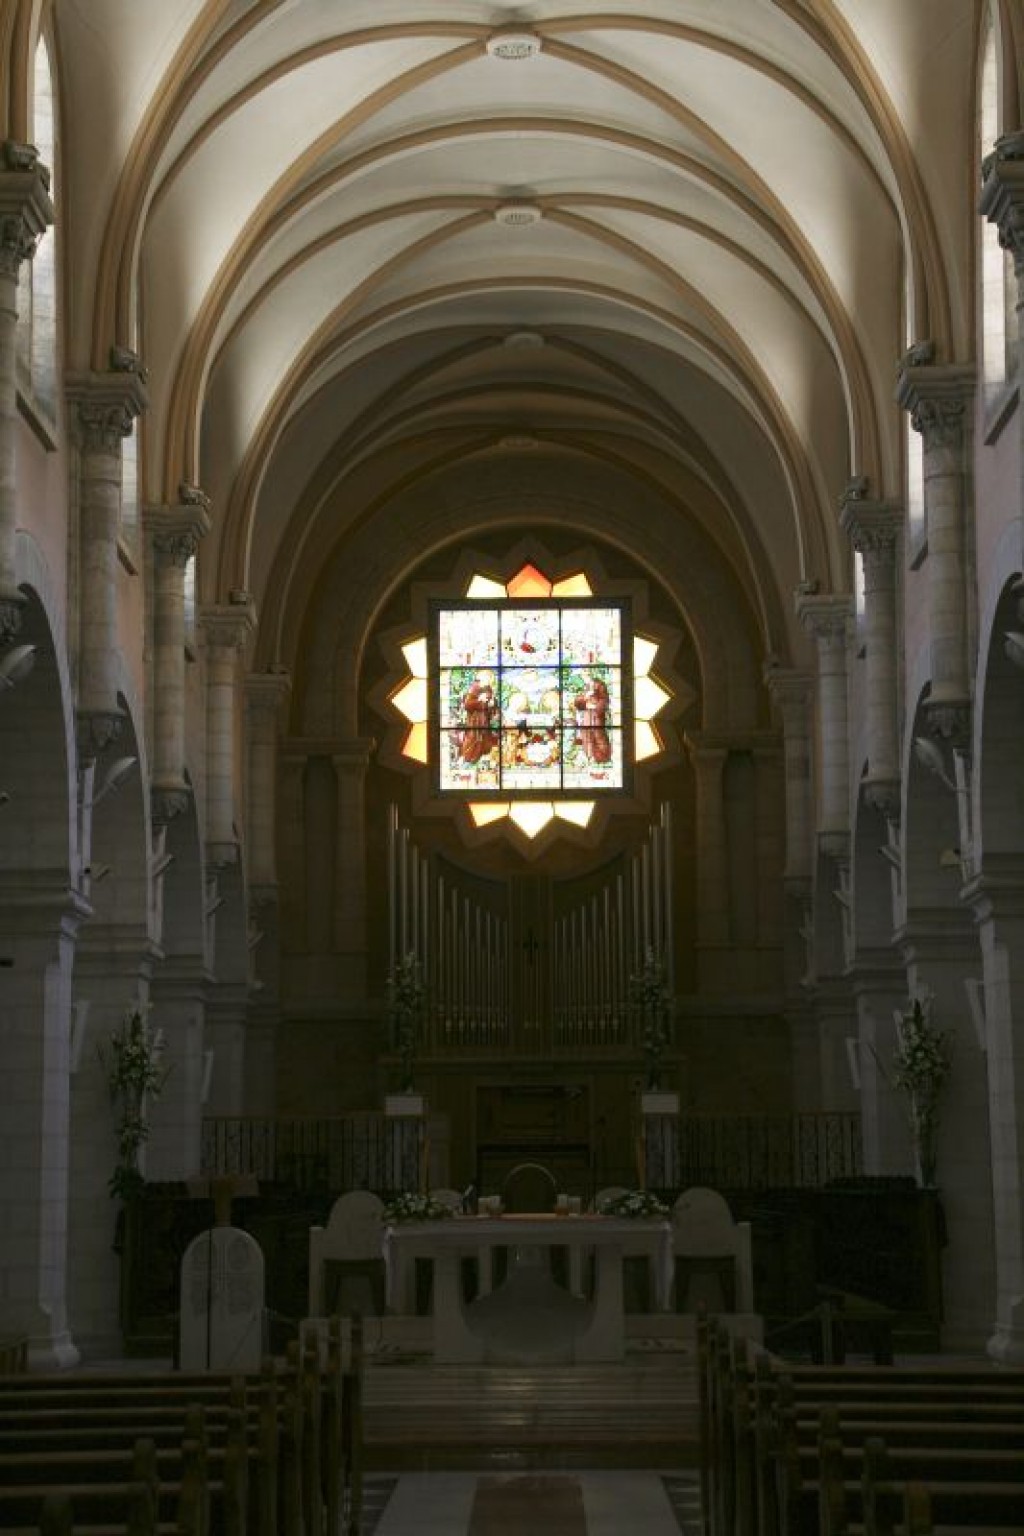 View of the interior of the Church of St. Catherine.